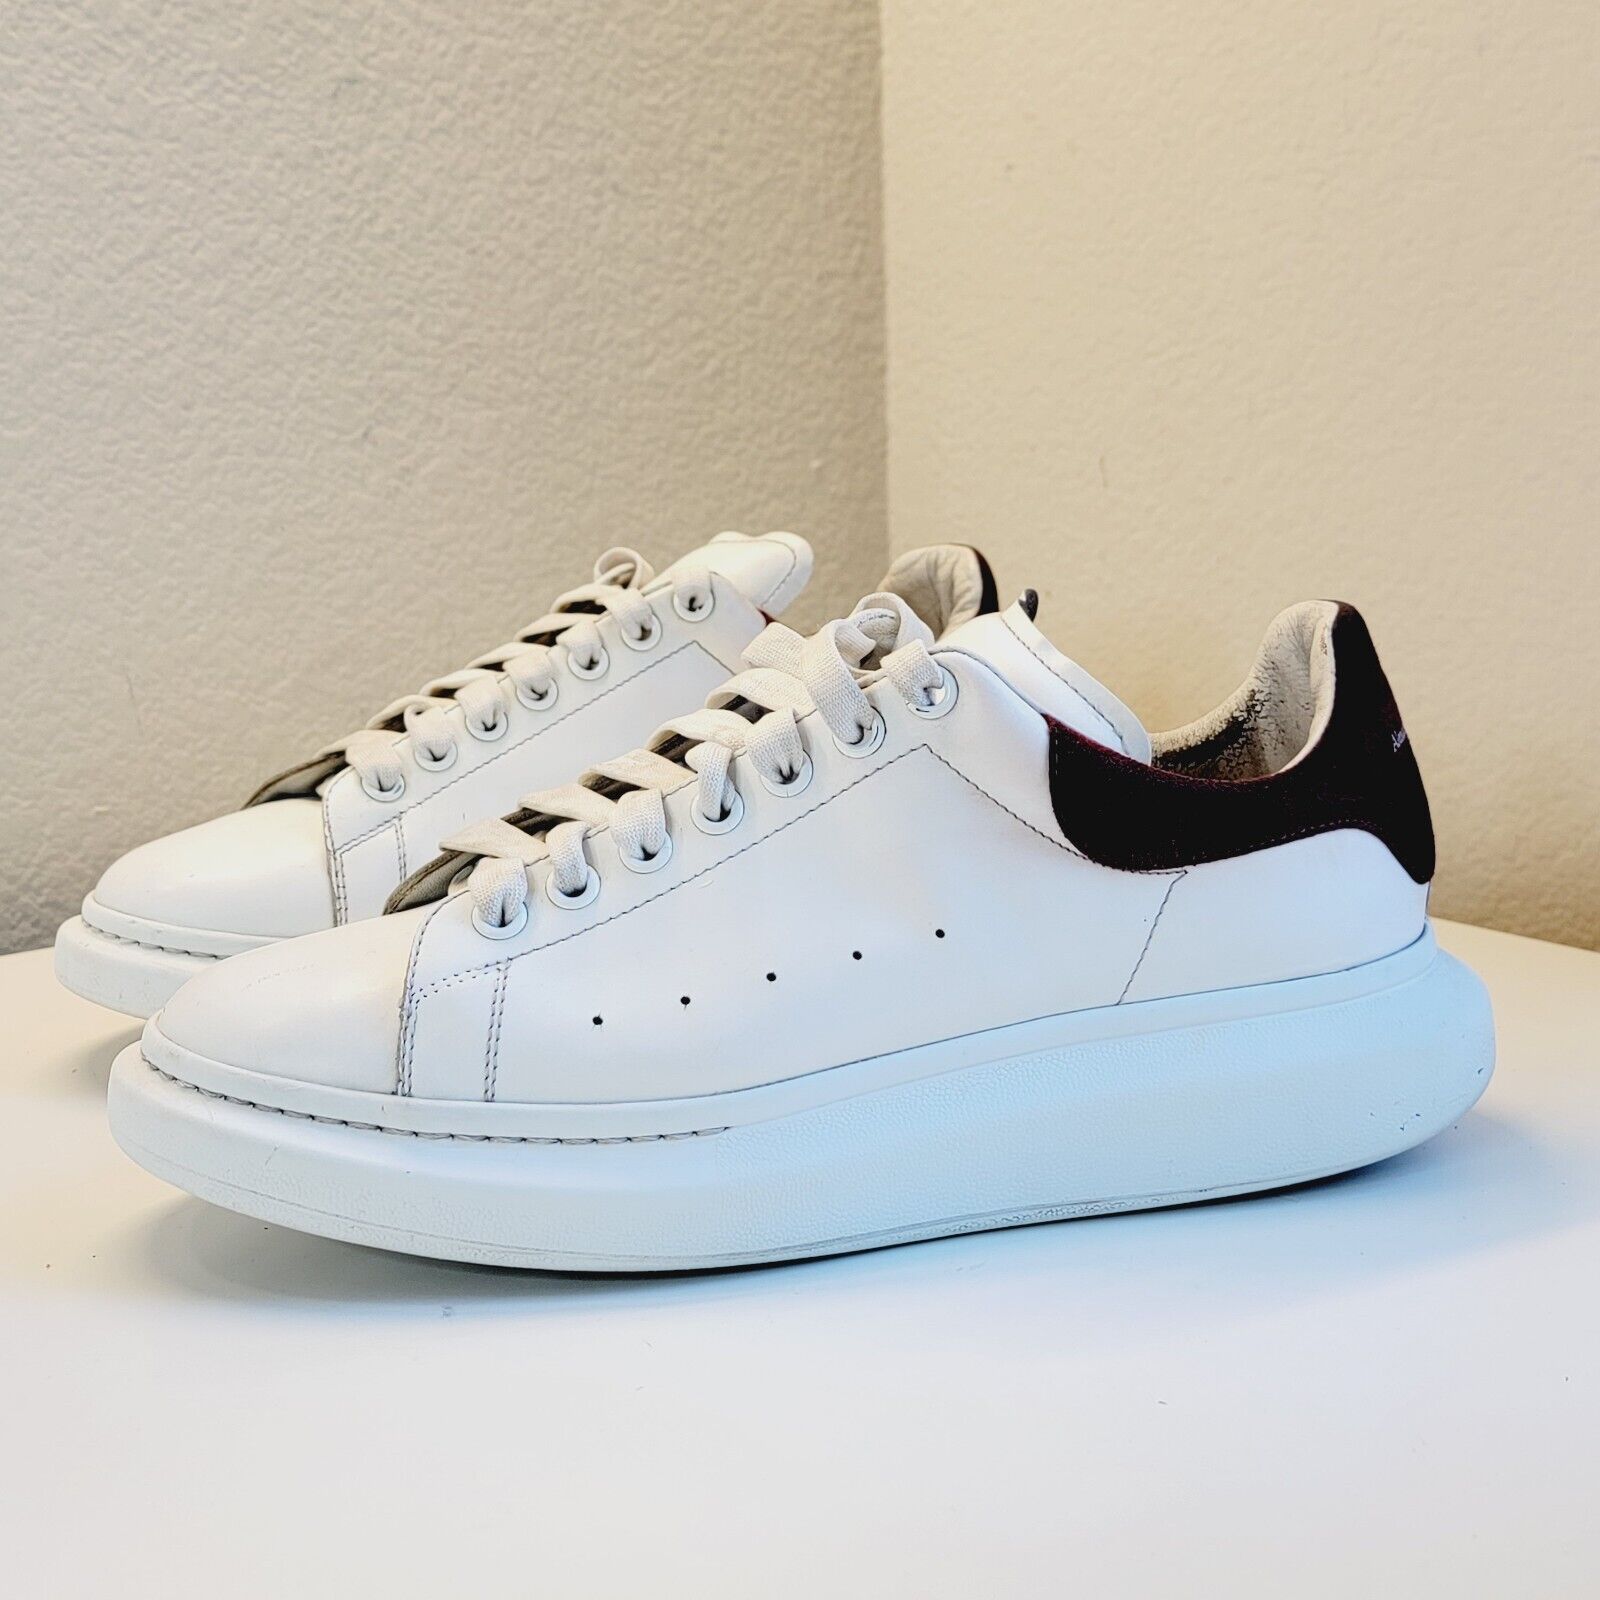 Alexander McQueen Oversized Sneakers Size 12 D (45) White Leather/Burgundy Suede